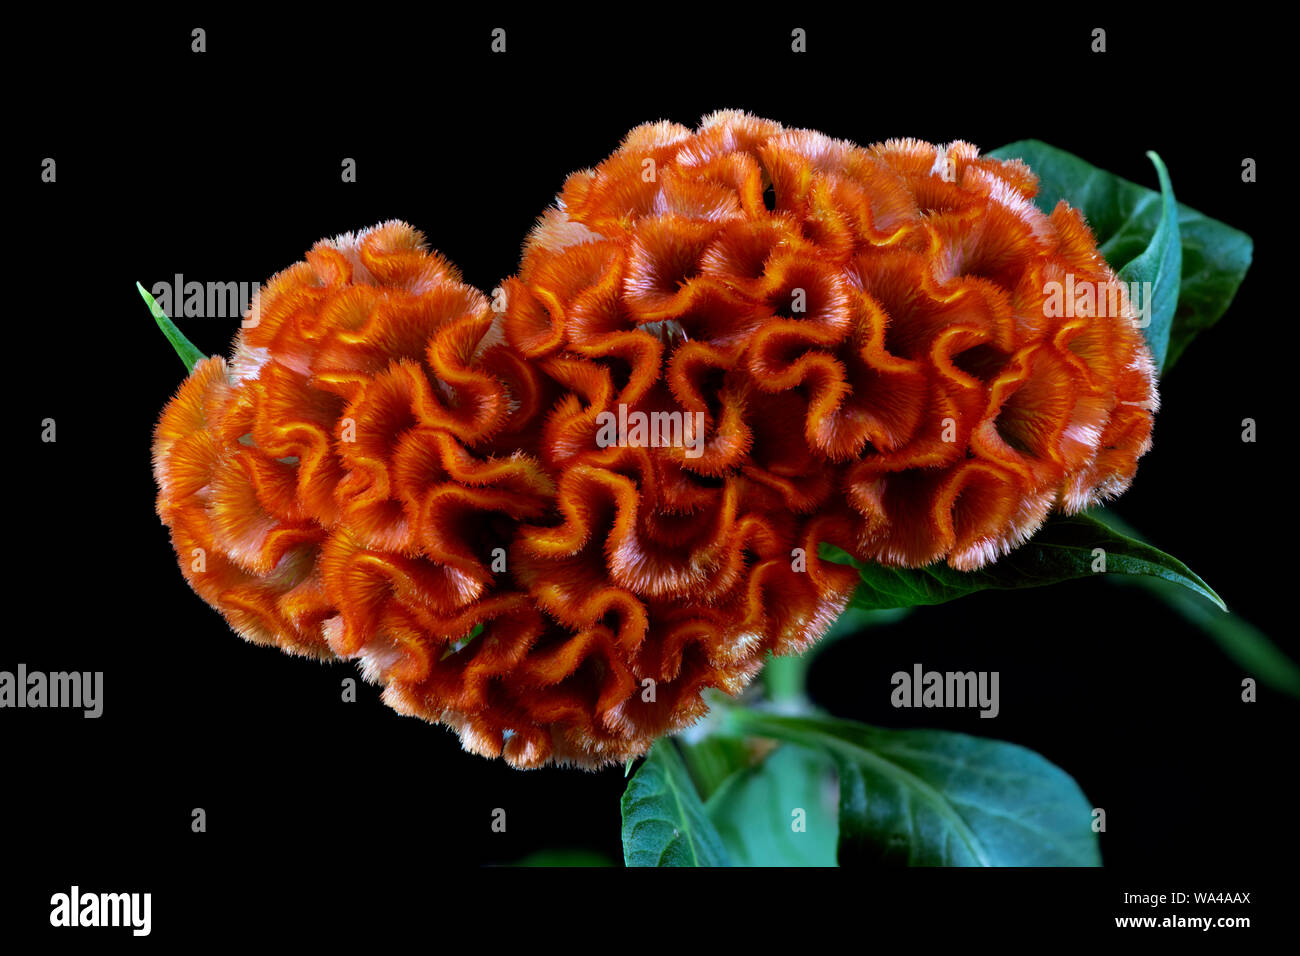 Cockscomb Flower also known as Wool Flower or Brain Celosia Stock Photo